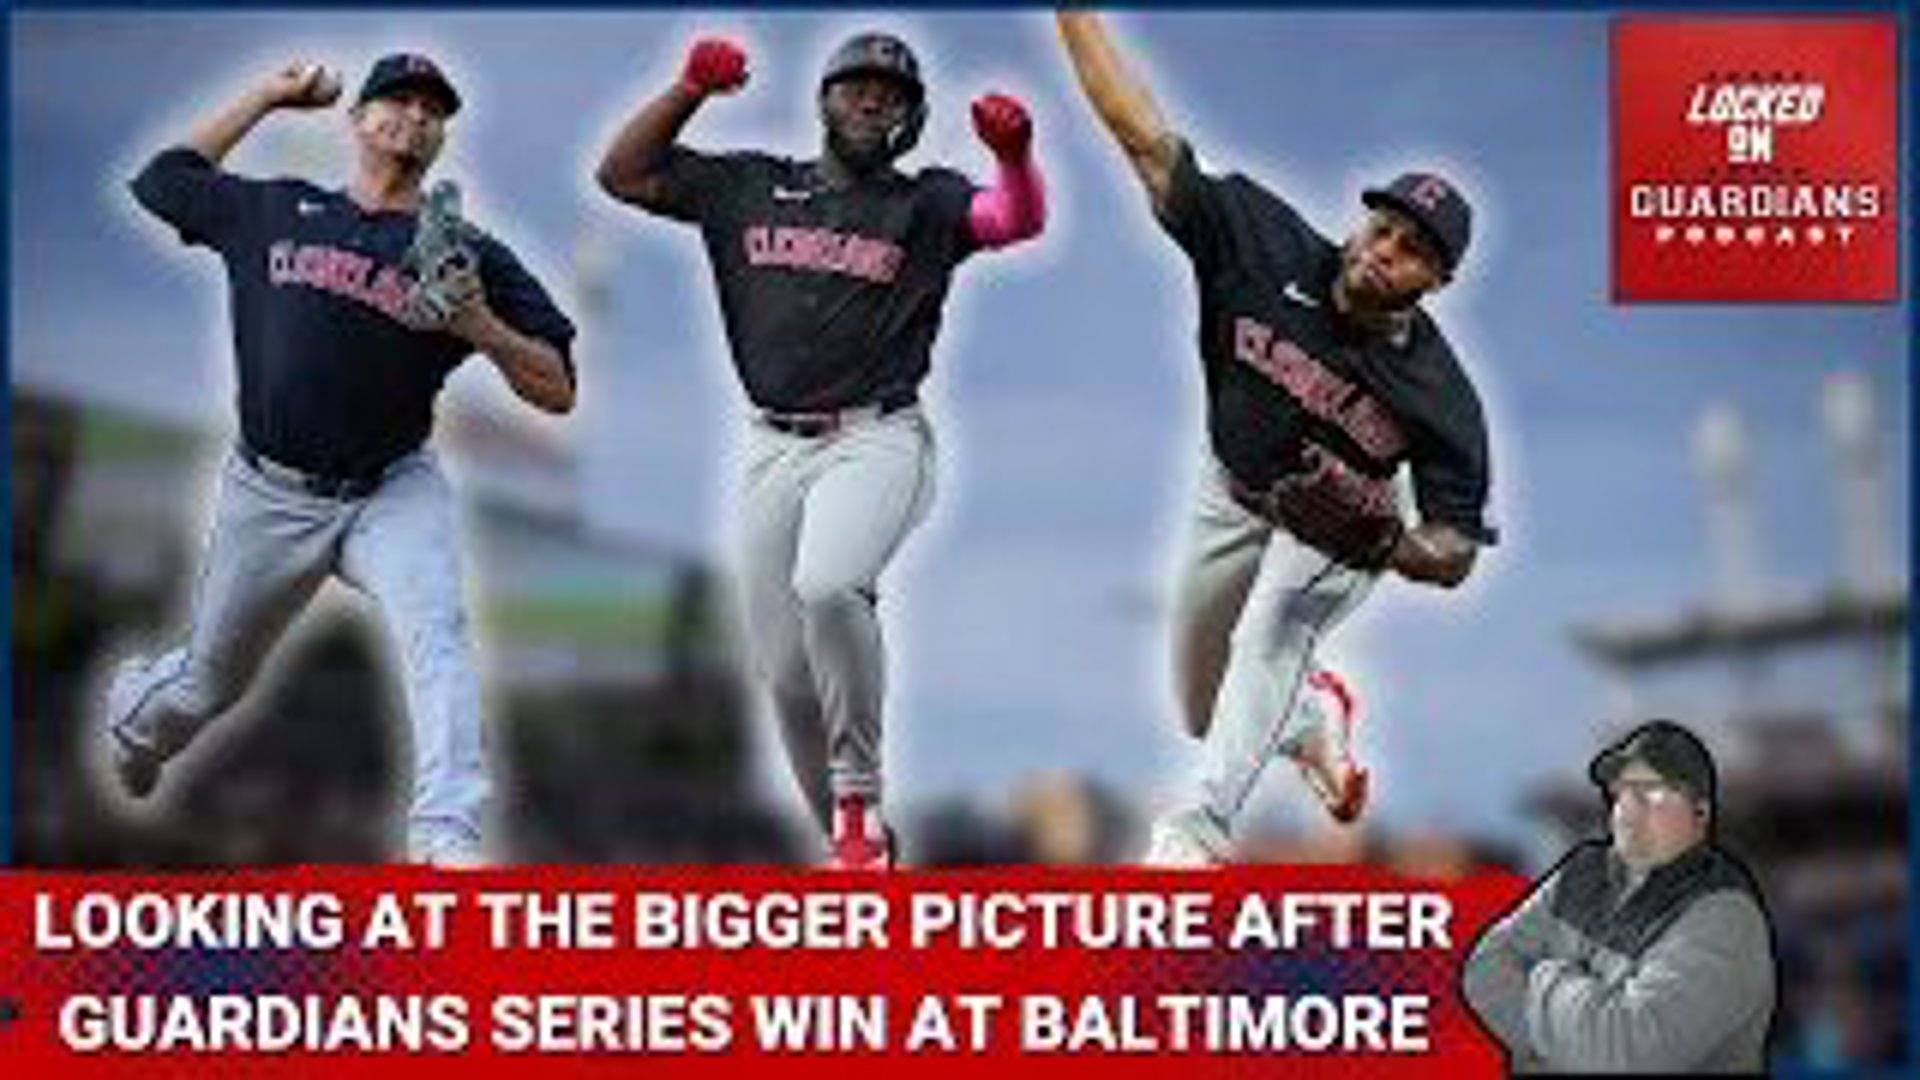 The Guardians won a big and impressive series at Baltimore against the Orioles. Despite not claiming the sweep, the Guardians played a close game.